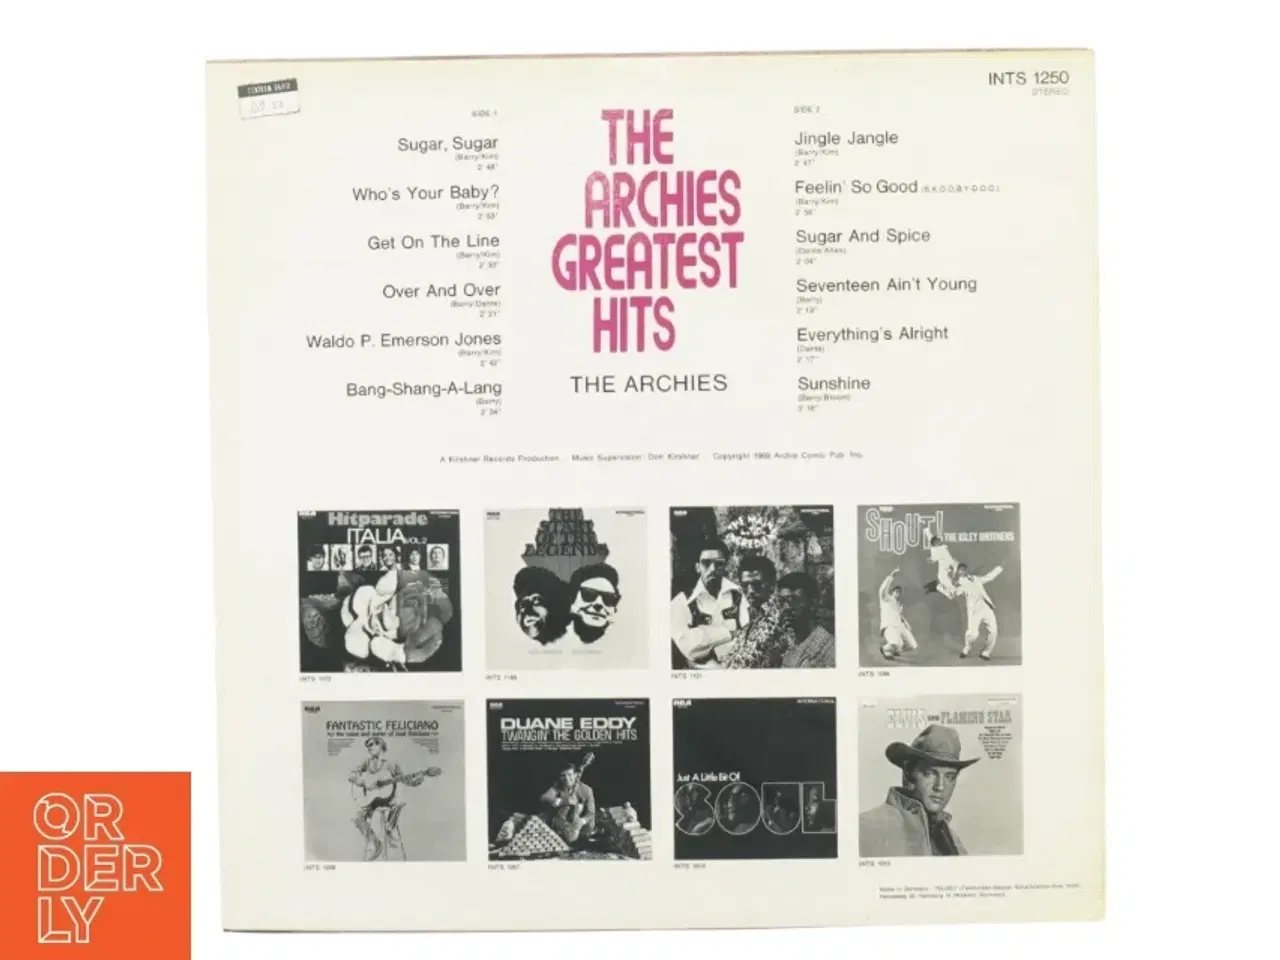 Billede 3 - The archies greatest hits fra Rca (str. 30 cm)